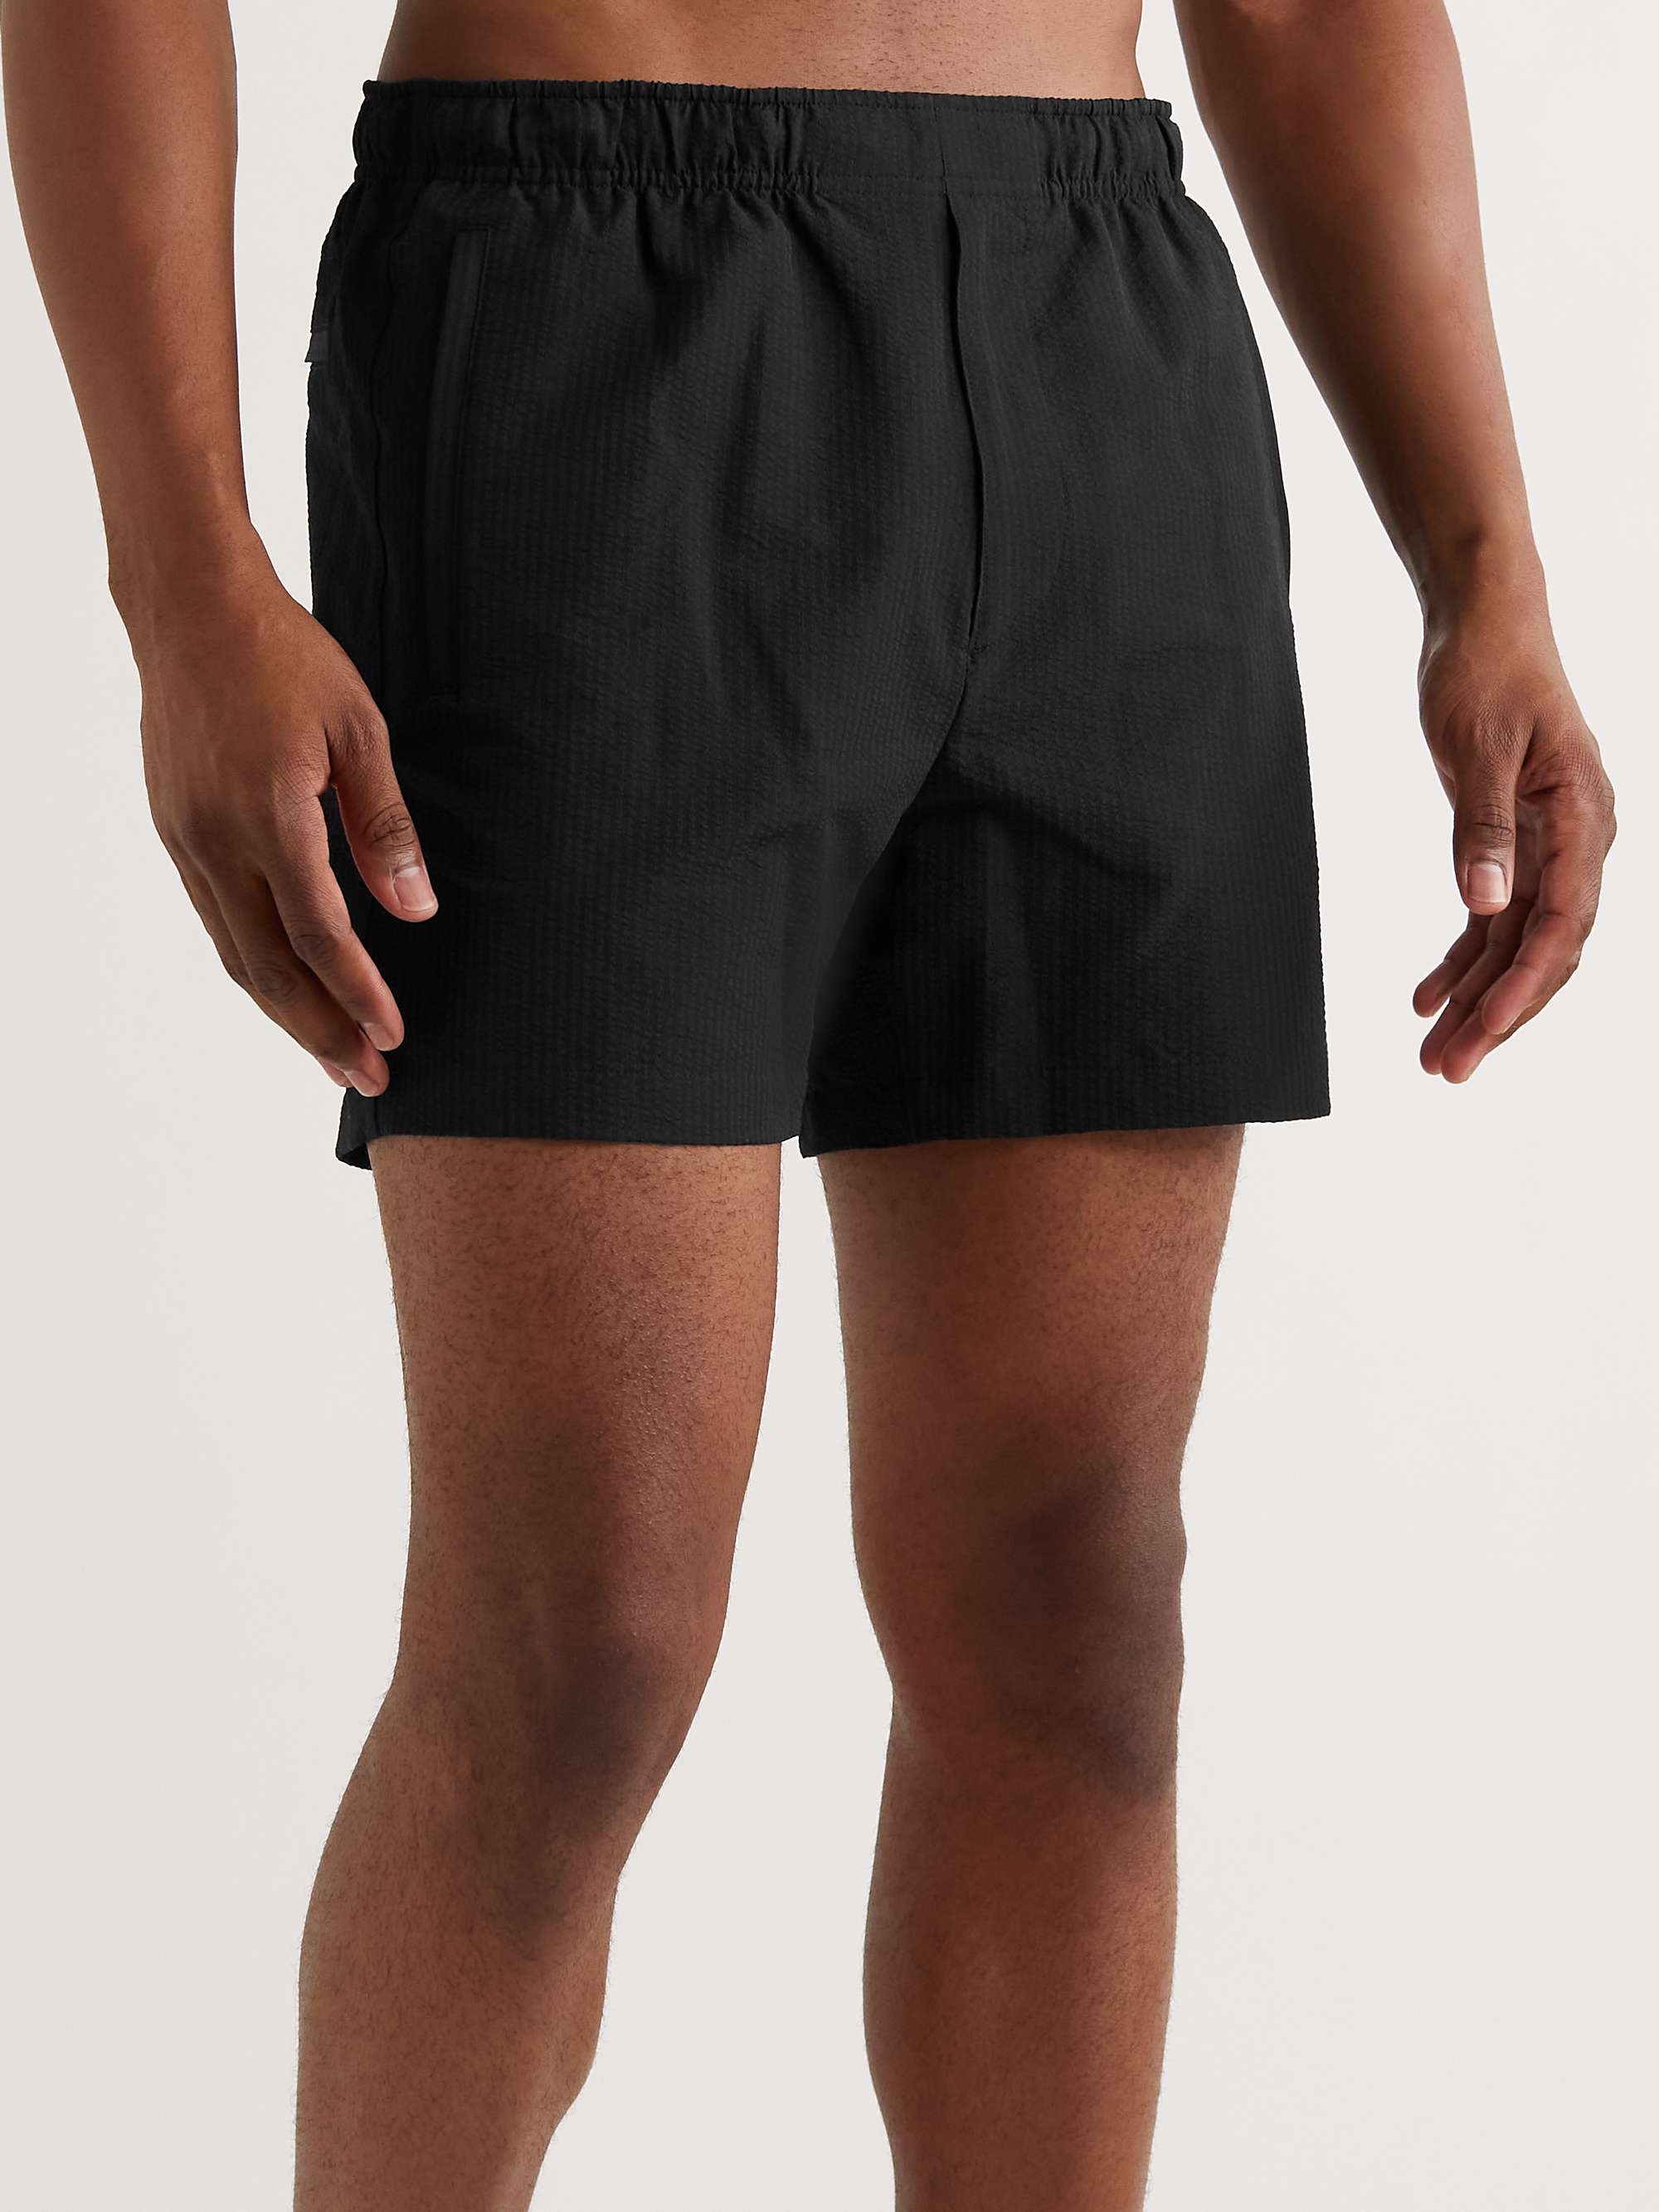 THEORY Jace Striped Recycled-Seersucker Swim Shorts for Men | MR PORTER